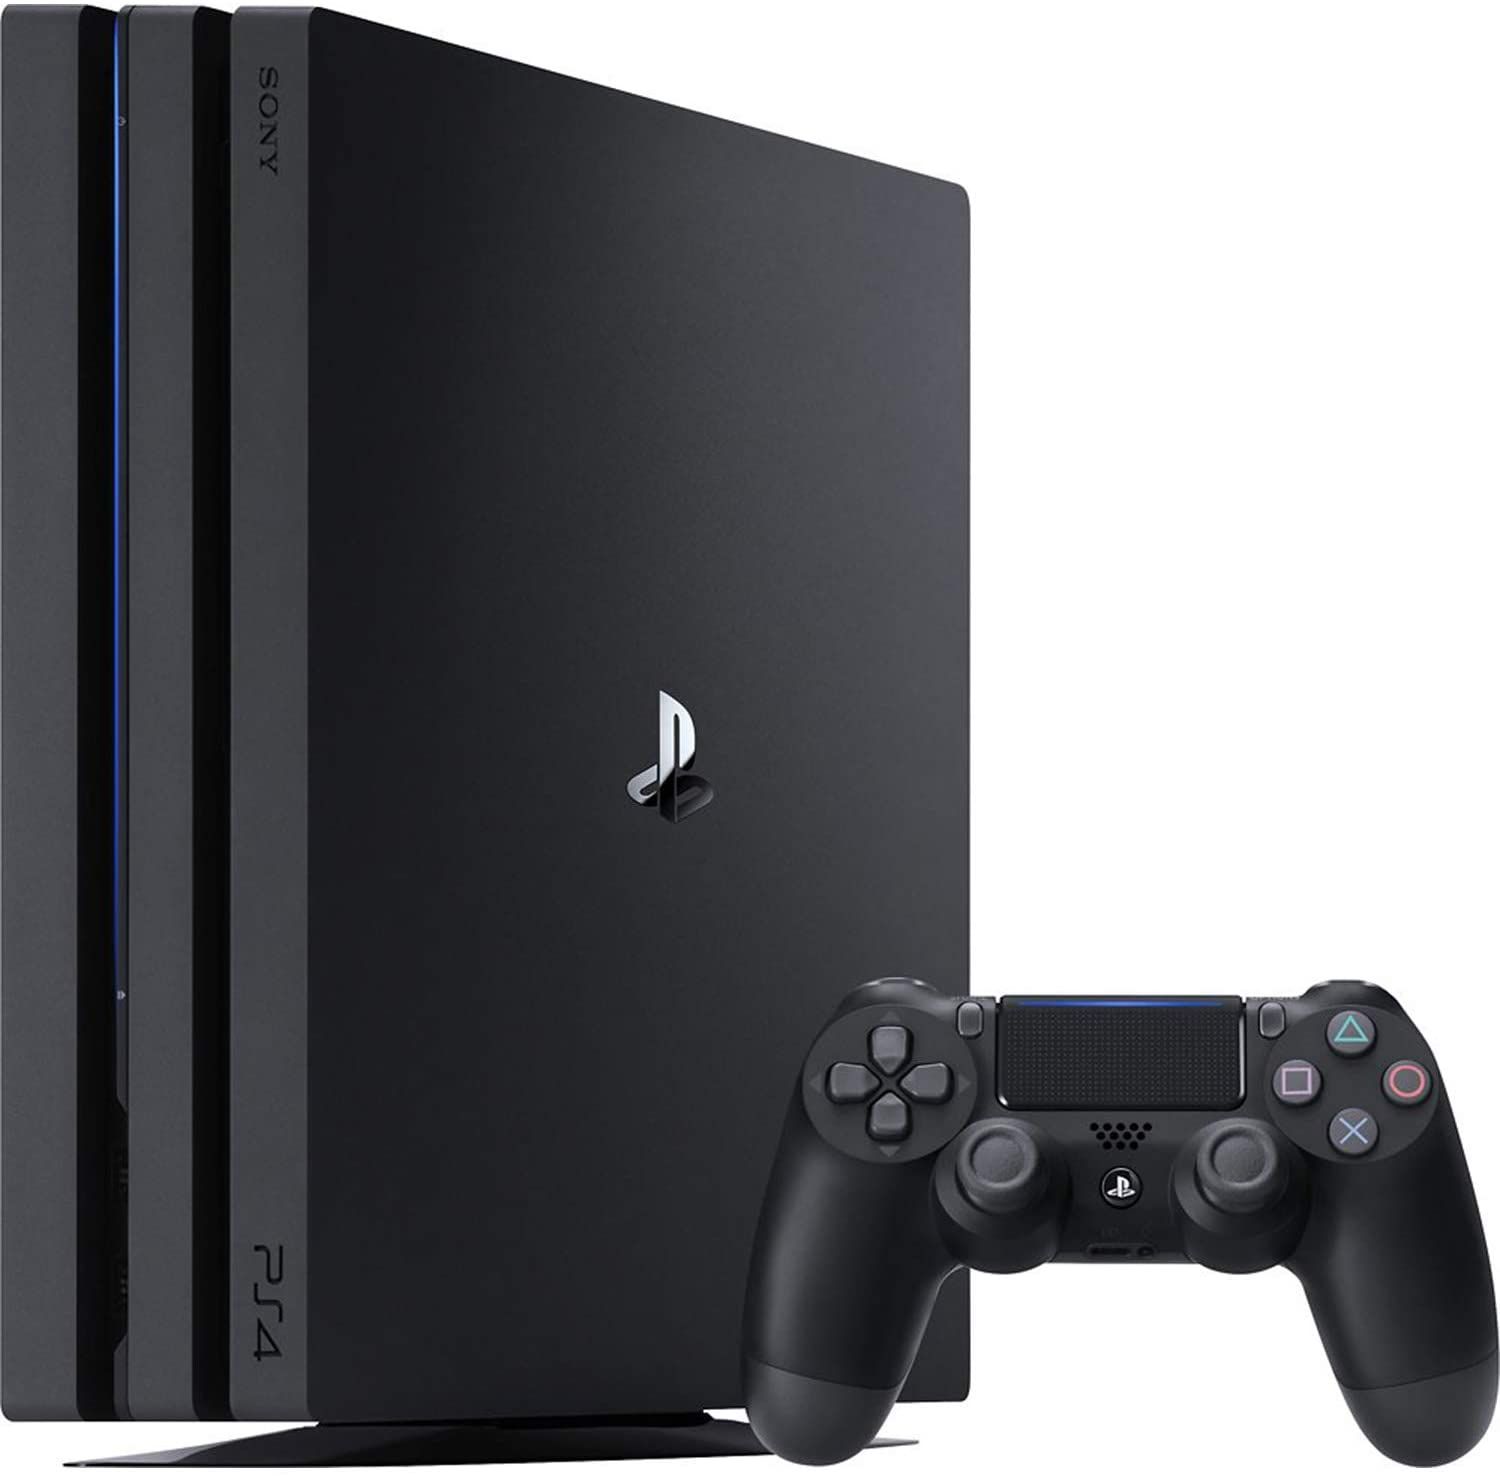 PlayStation 4 Pro standing on side, next to Dualshock 4 controller